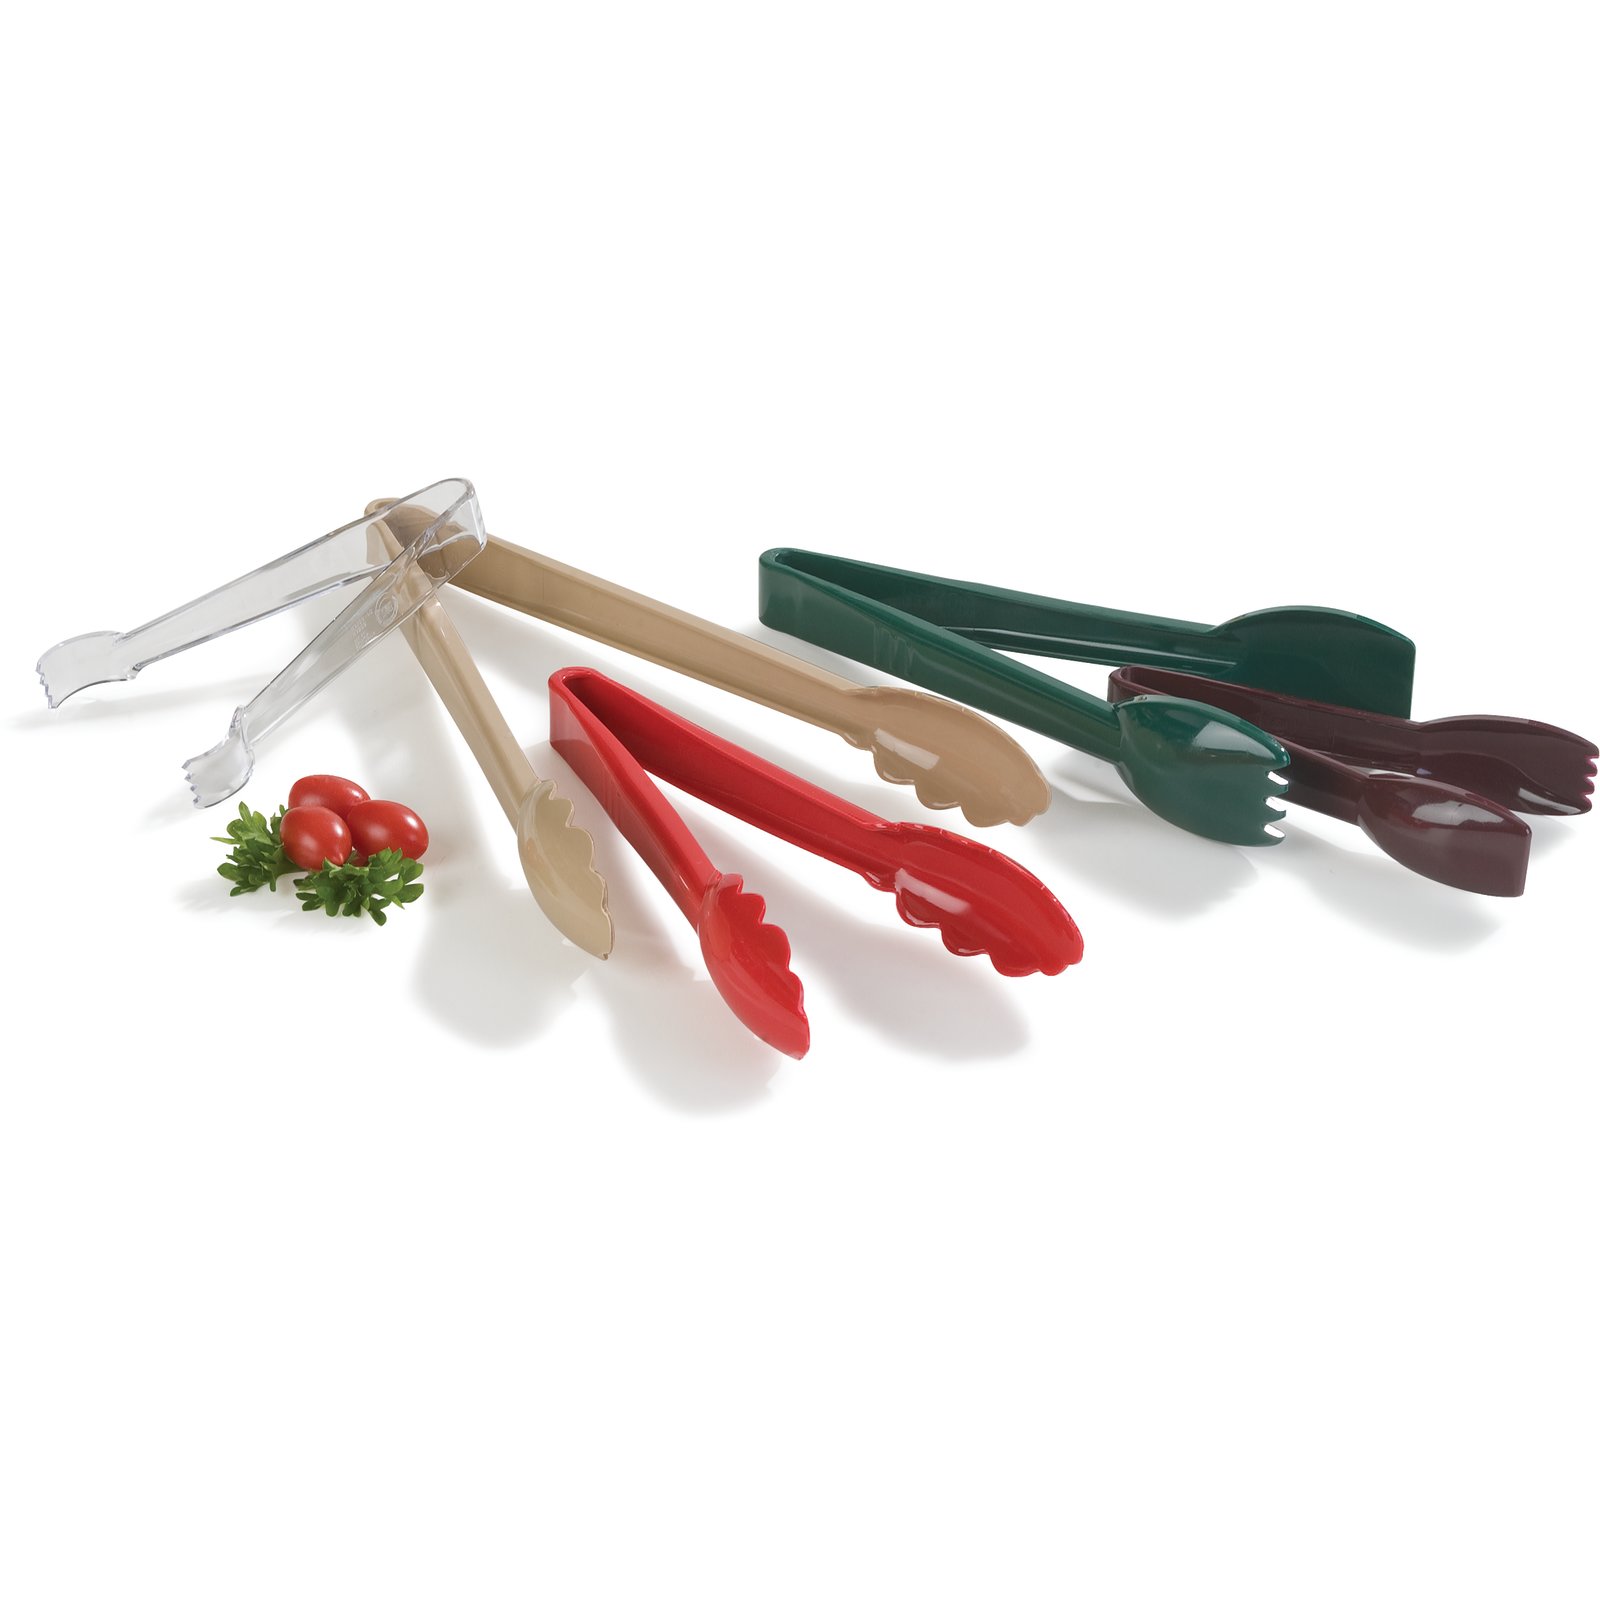 Kitchen Set with Masher, Tongs, Skimmer, Spatula, and Brush, Red Face visor  кулинарные инструменты кухо